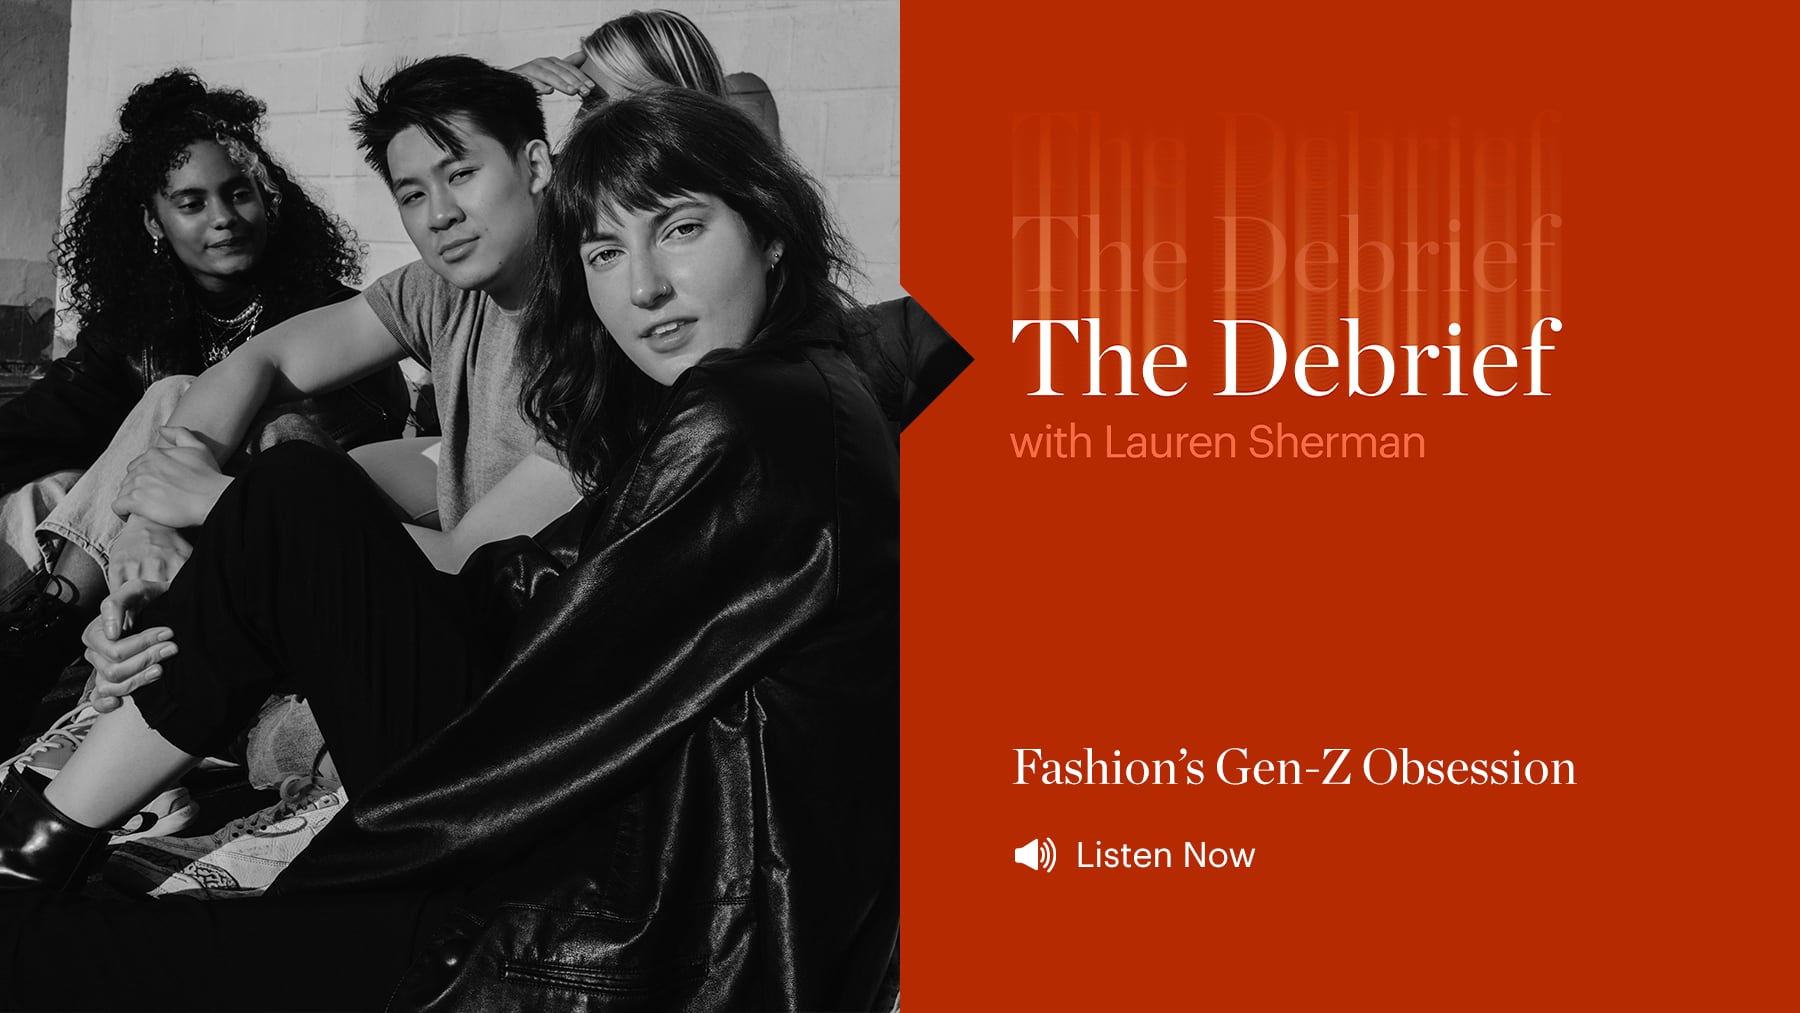 Fashion's Gen-Z Obsession The Debrief with Lauren Sherman